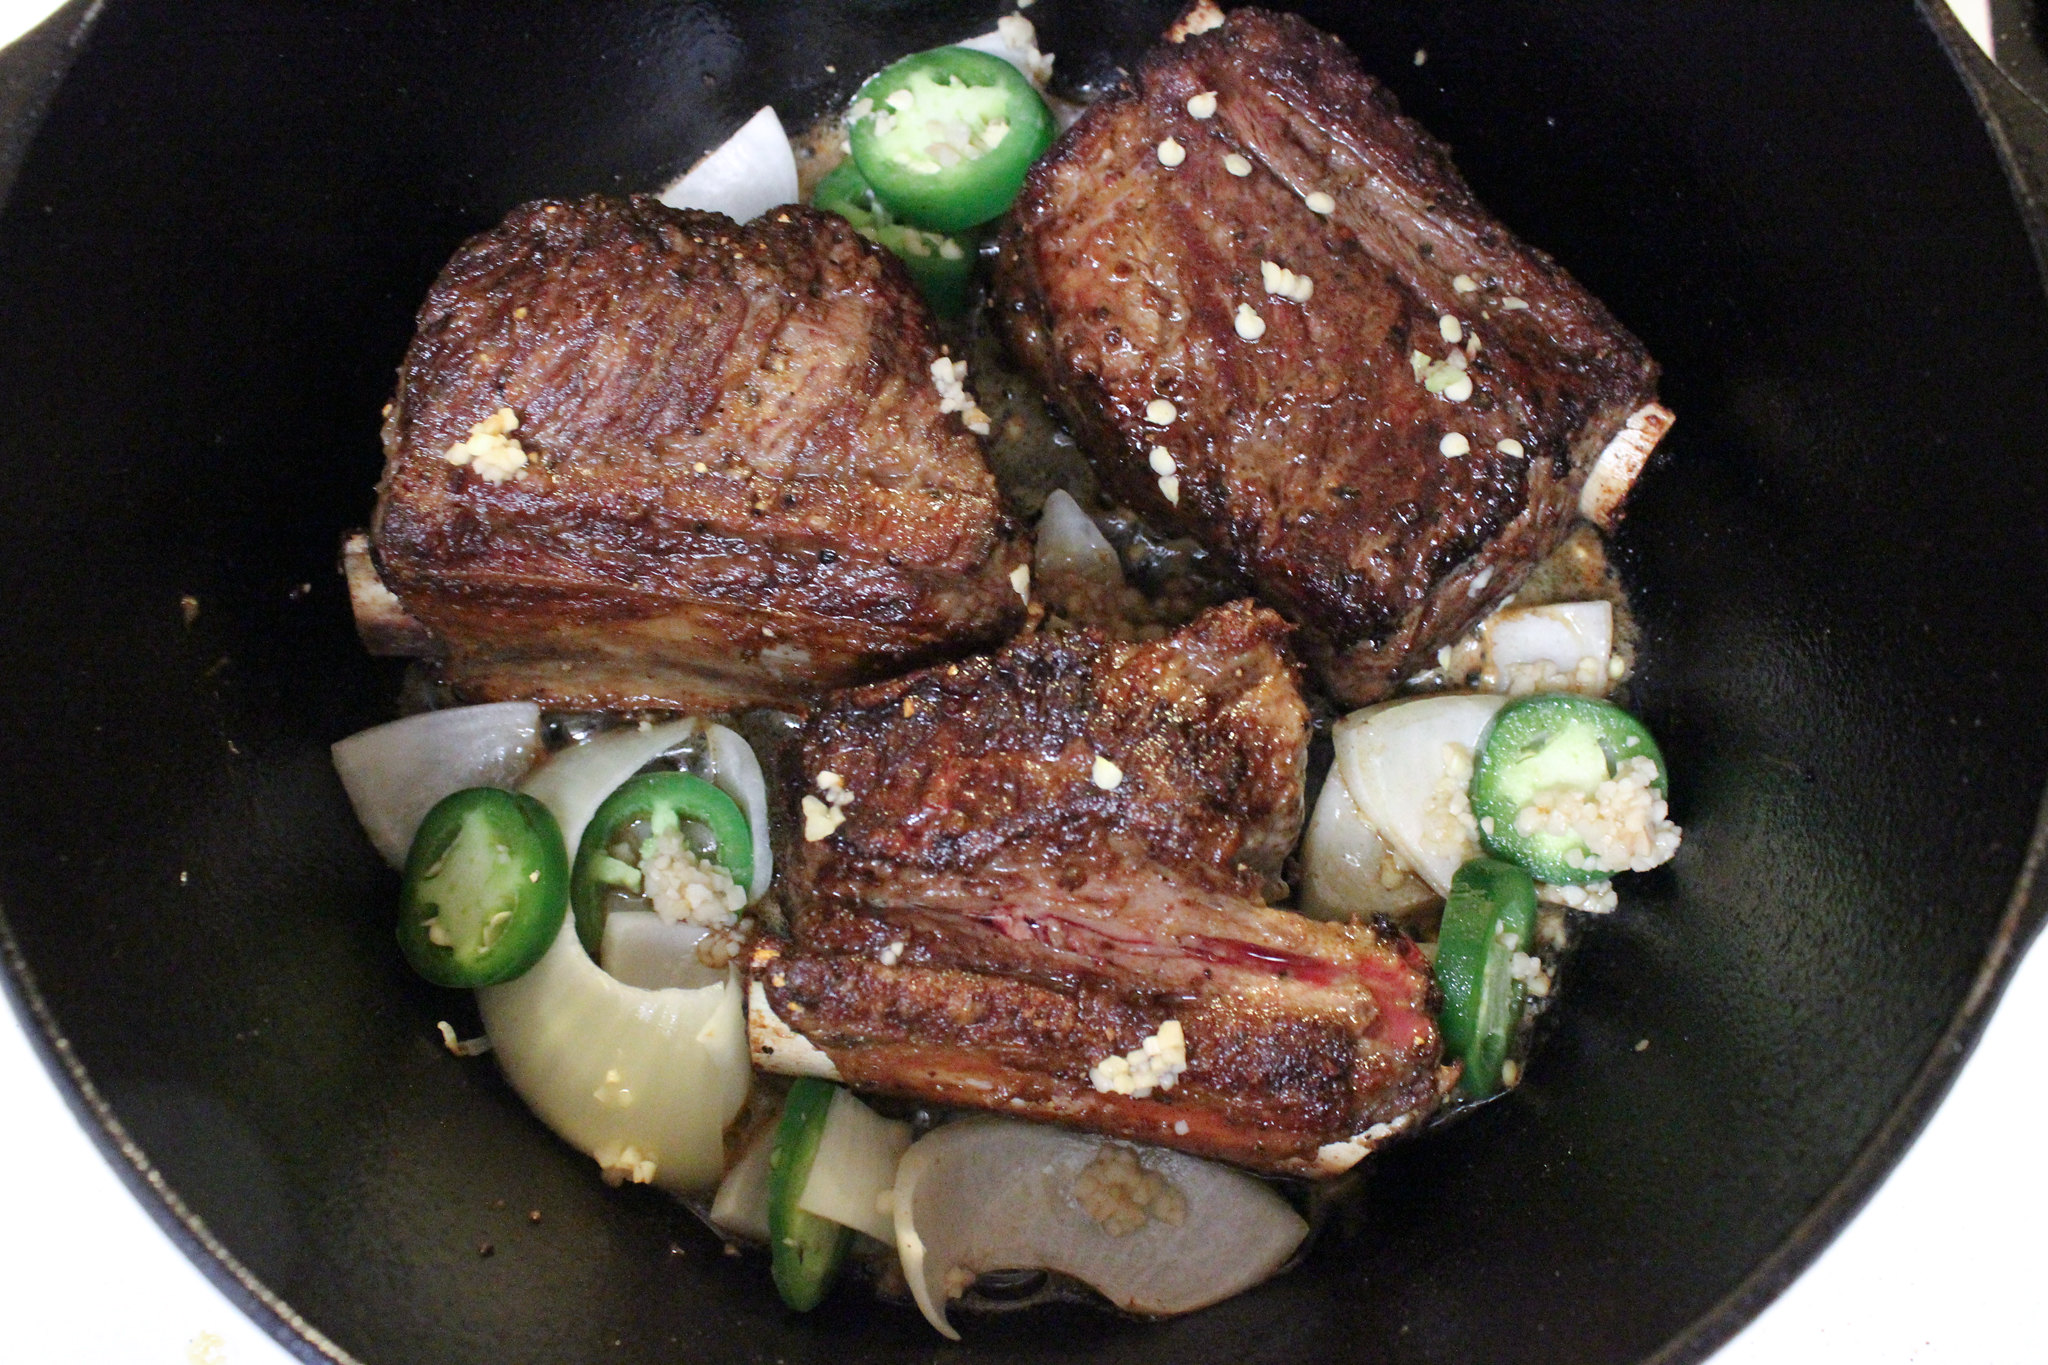 Ribs with onions, jalapeno and garlic